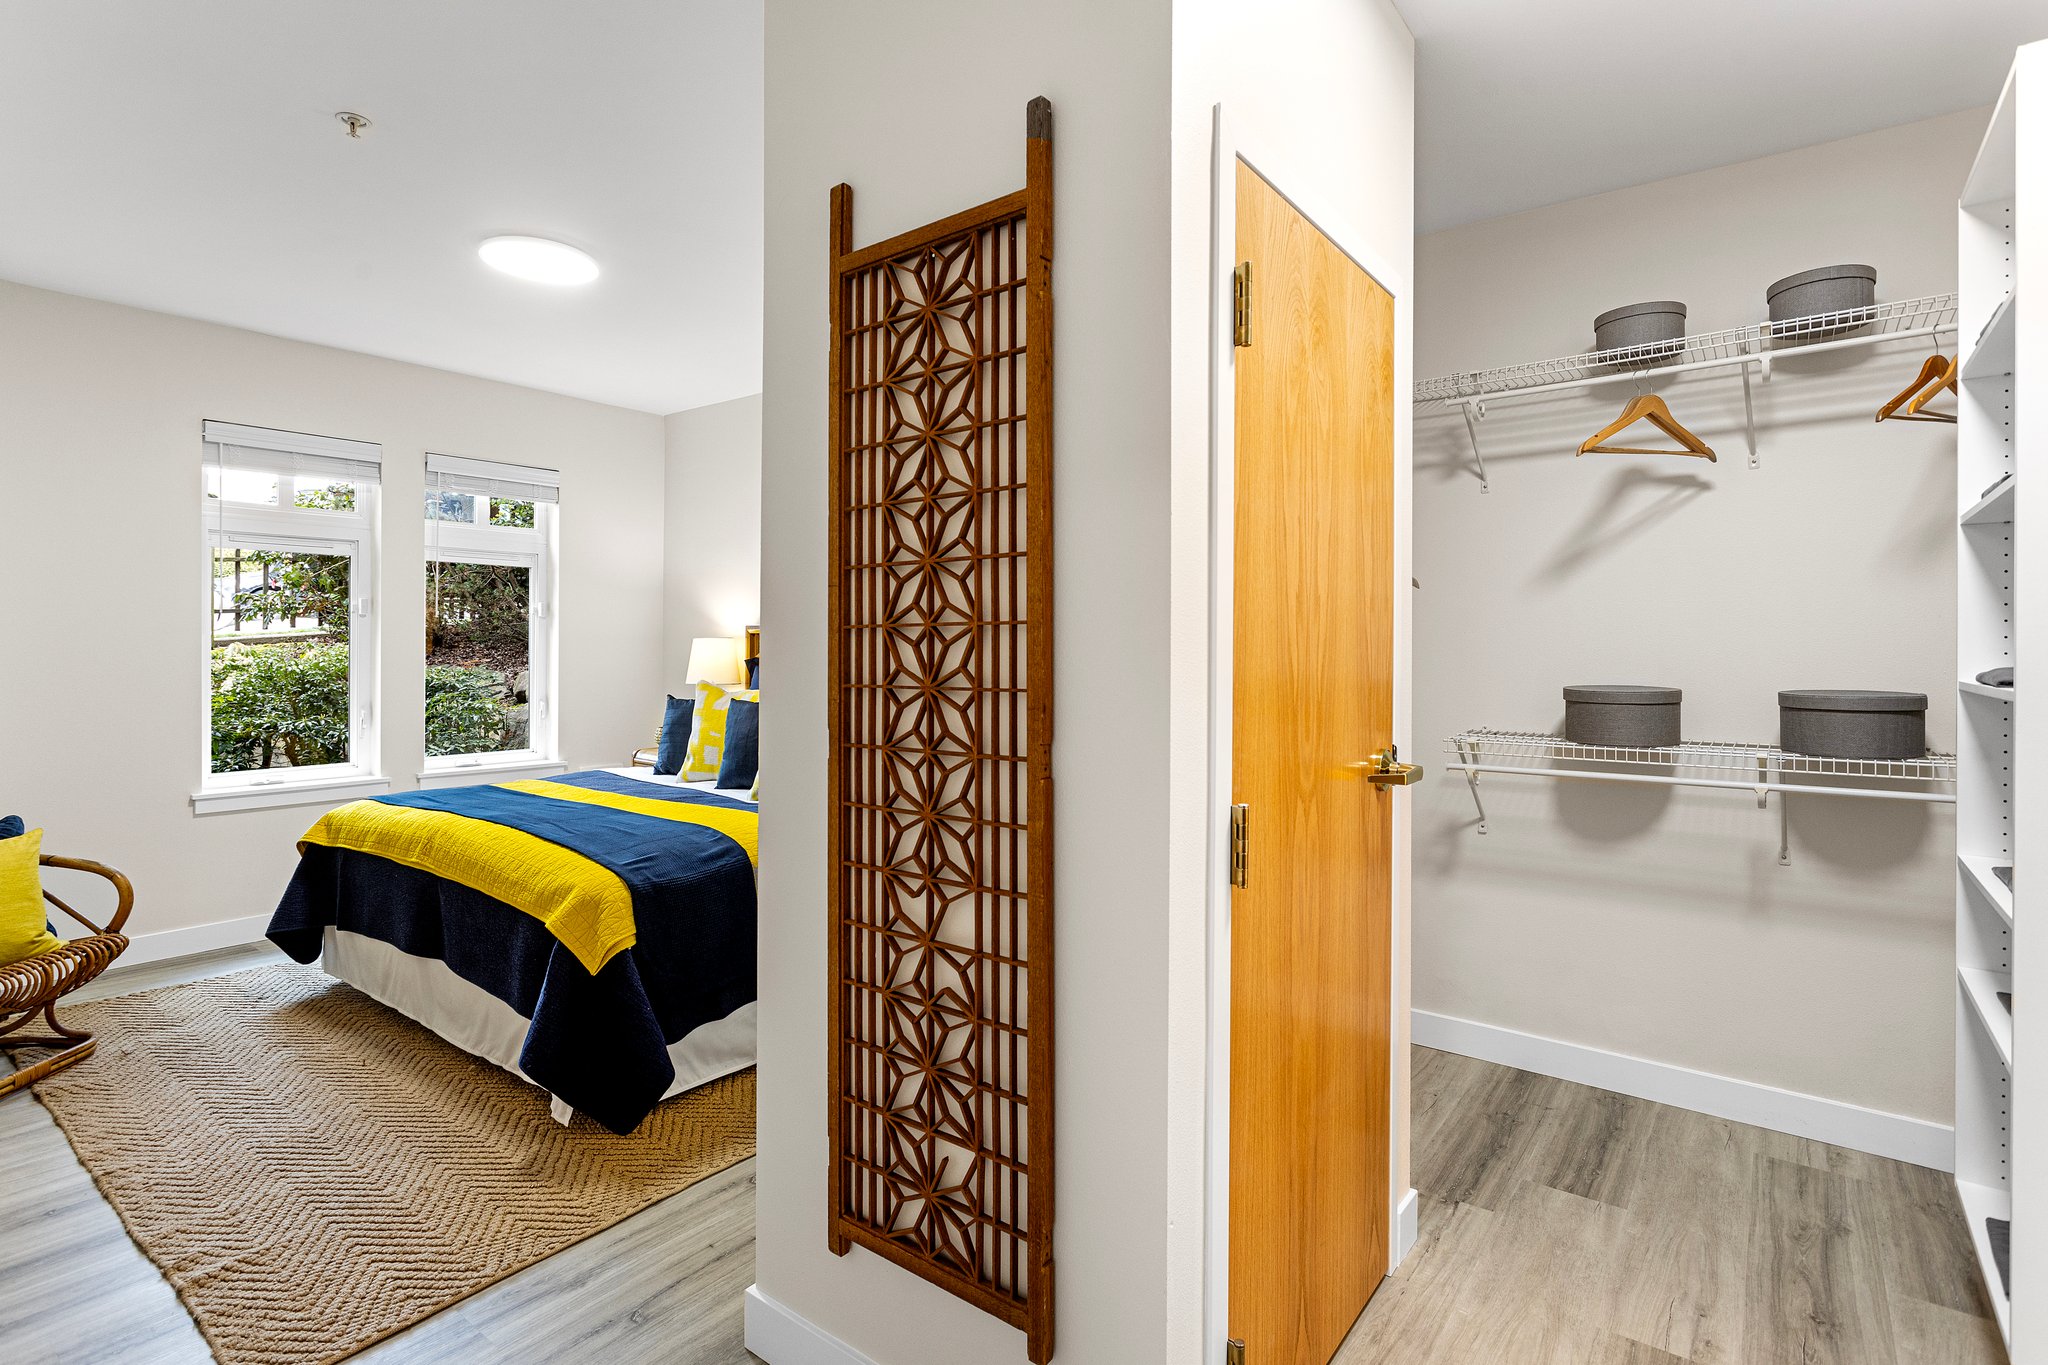 The primary suite is a haven of space and style, with a walk-in closet that offers generous room for wardrobe essentials, and an extra closet for additional storage needs.